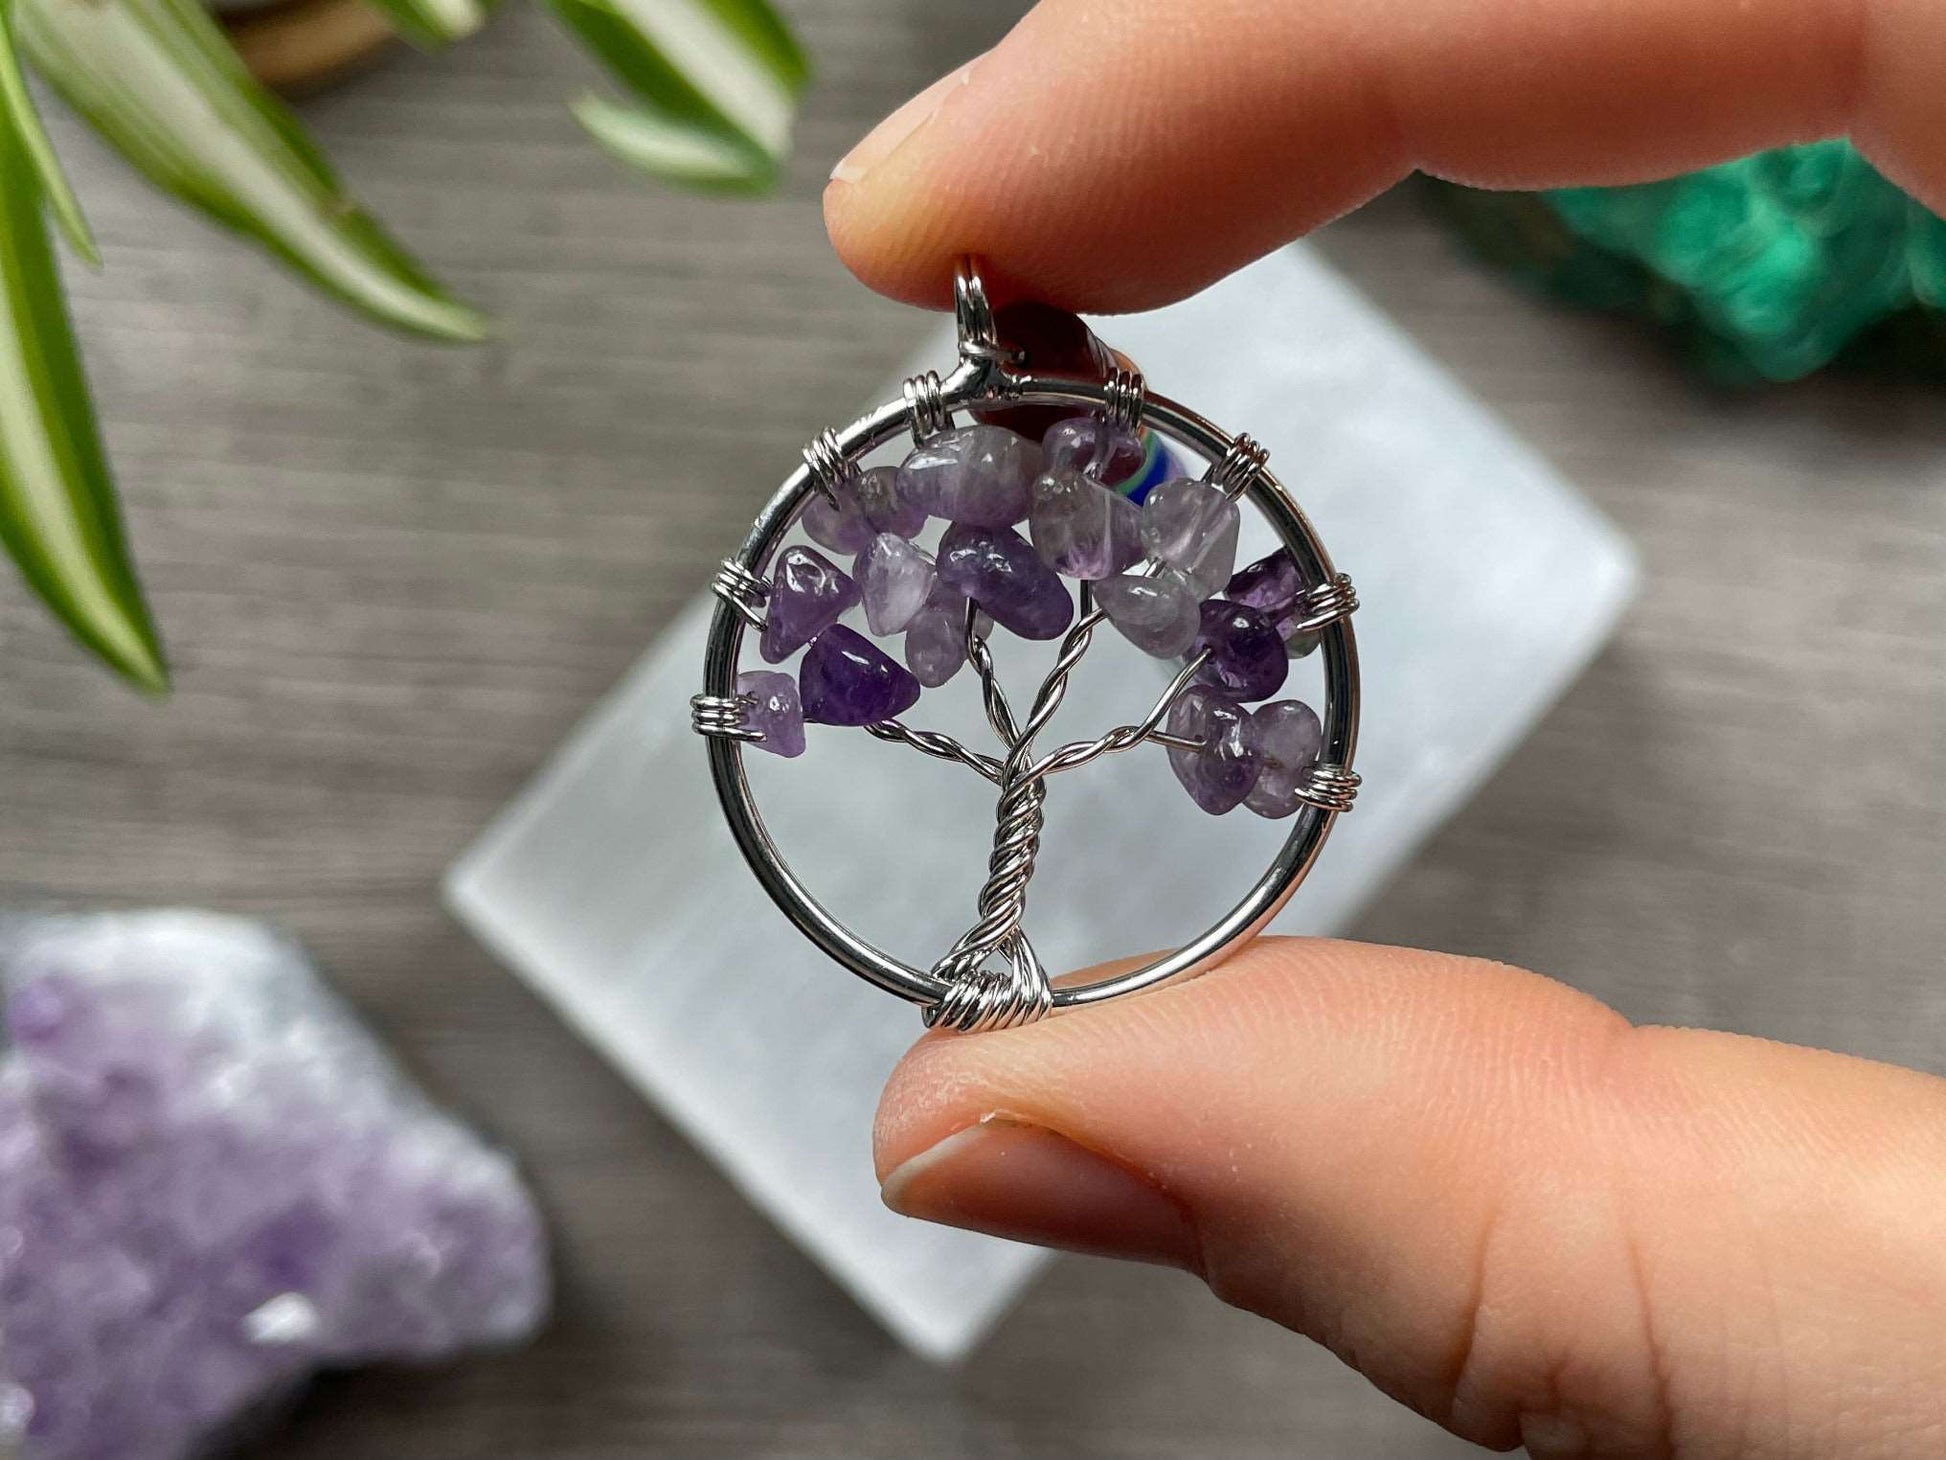 A tree of life with amethyst crystals as the leaves on the tree is in the image. The keychain has a number of small multi-coloured beads to represent the chakras on the chain. The keychain sits atop a slab of selenite. Malachite, pink amethyst, and amethyst are nearby.